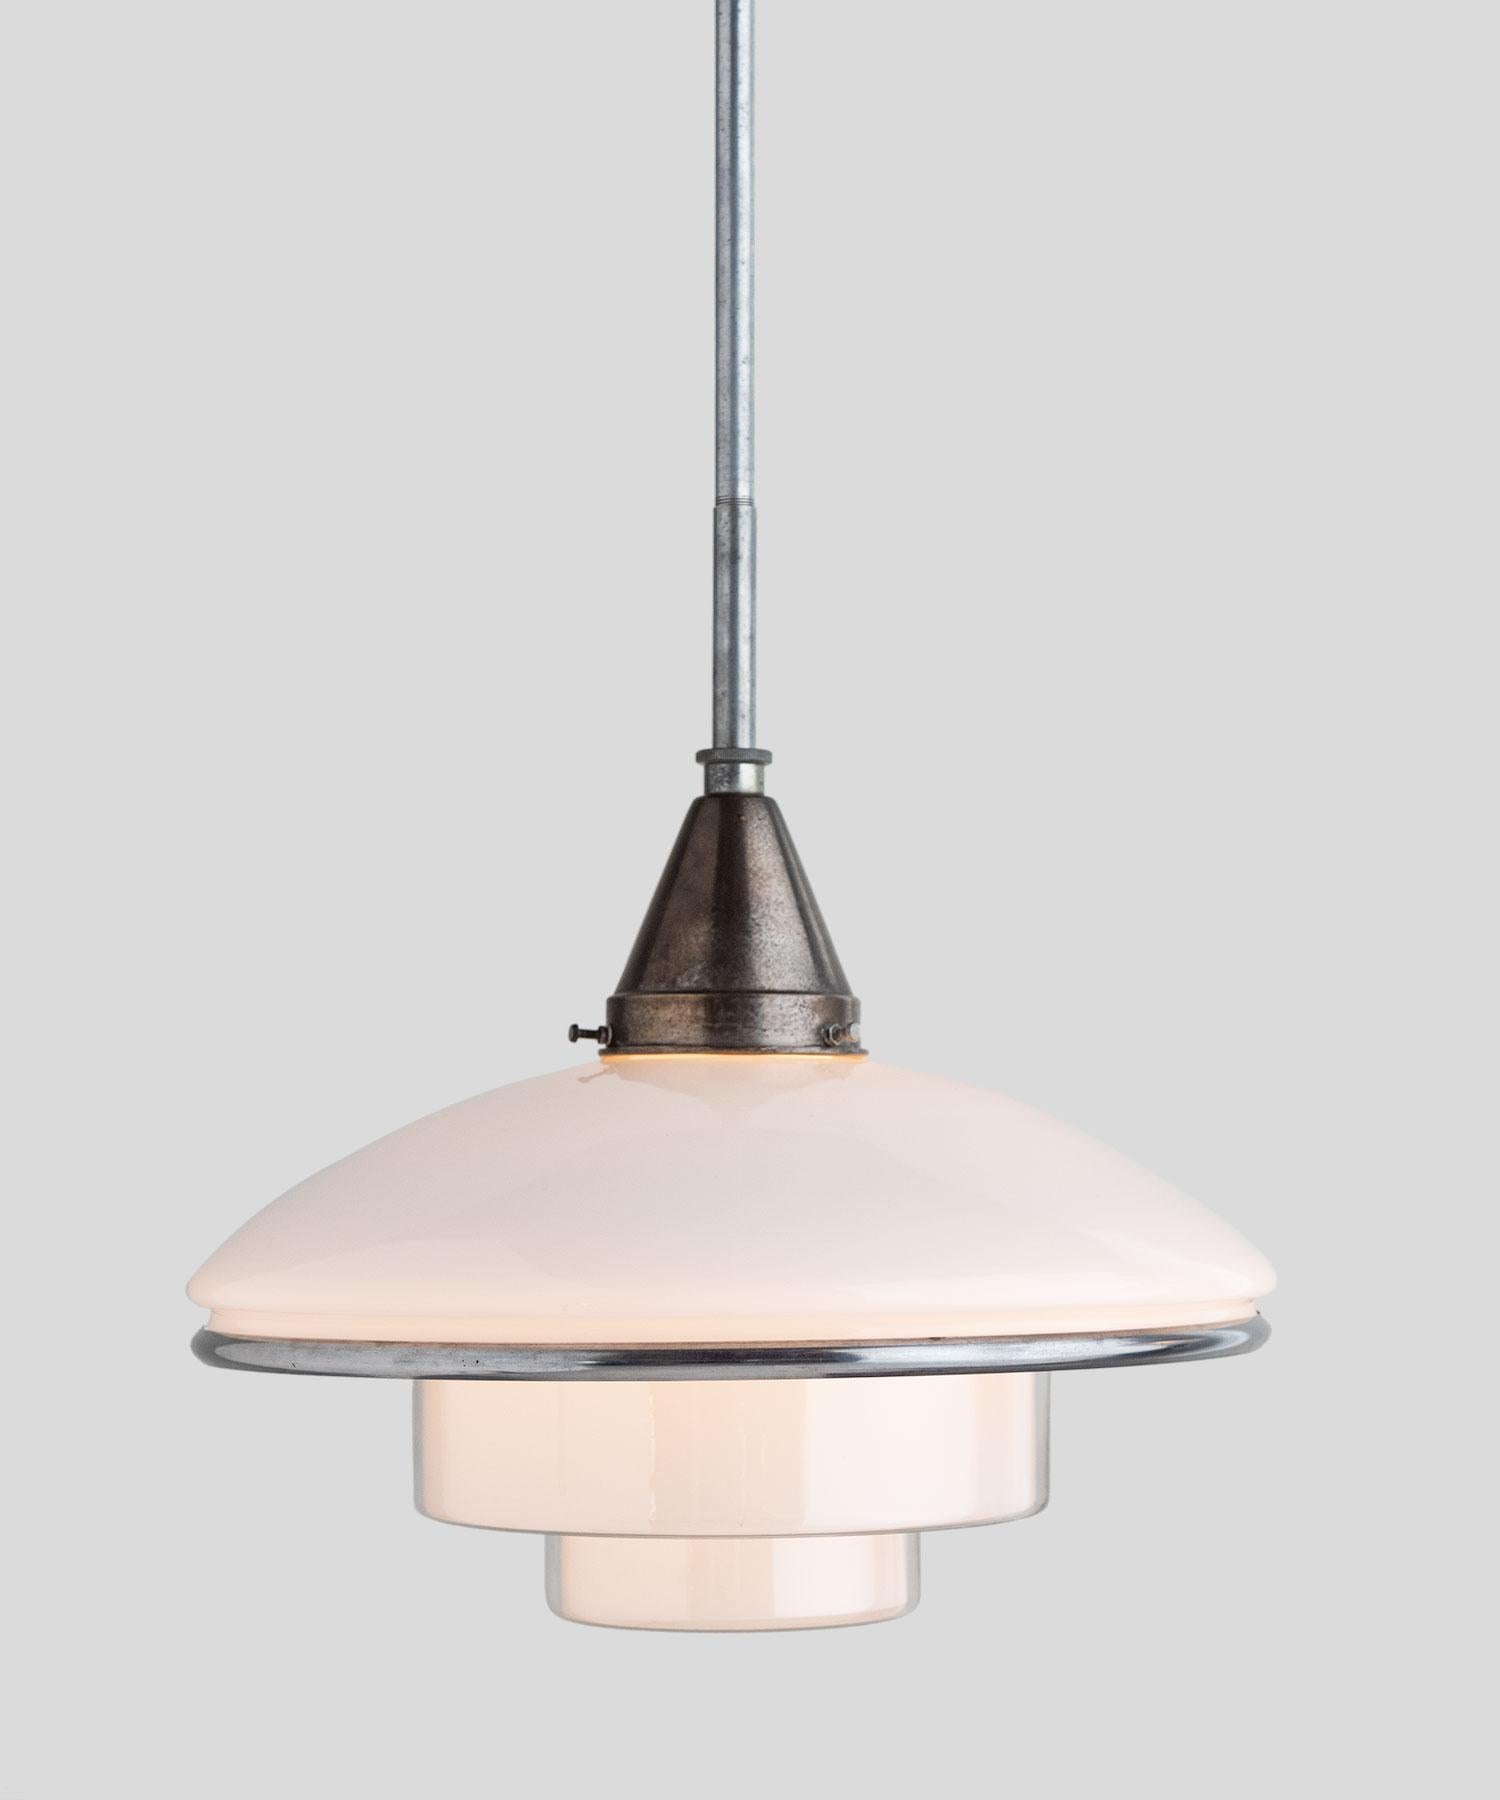 Opaline glass pendant by Otto Müller, circa 1931.

Designed by Otto Müller, manufactured by Sistrah in Germany. Composed of two main glass elements, a white opaline glass dome and an inverted ziggurat shaped opaline glass shade. Chrome-plated belt.